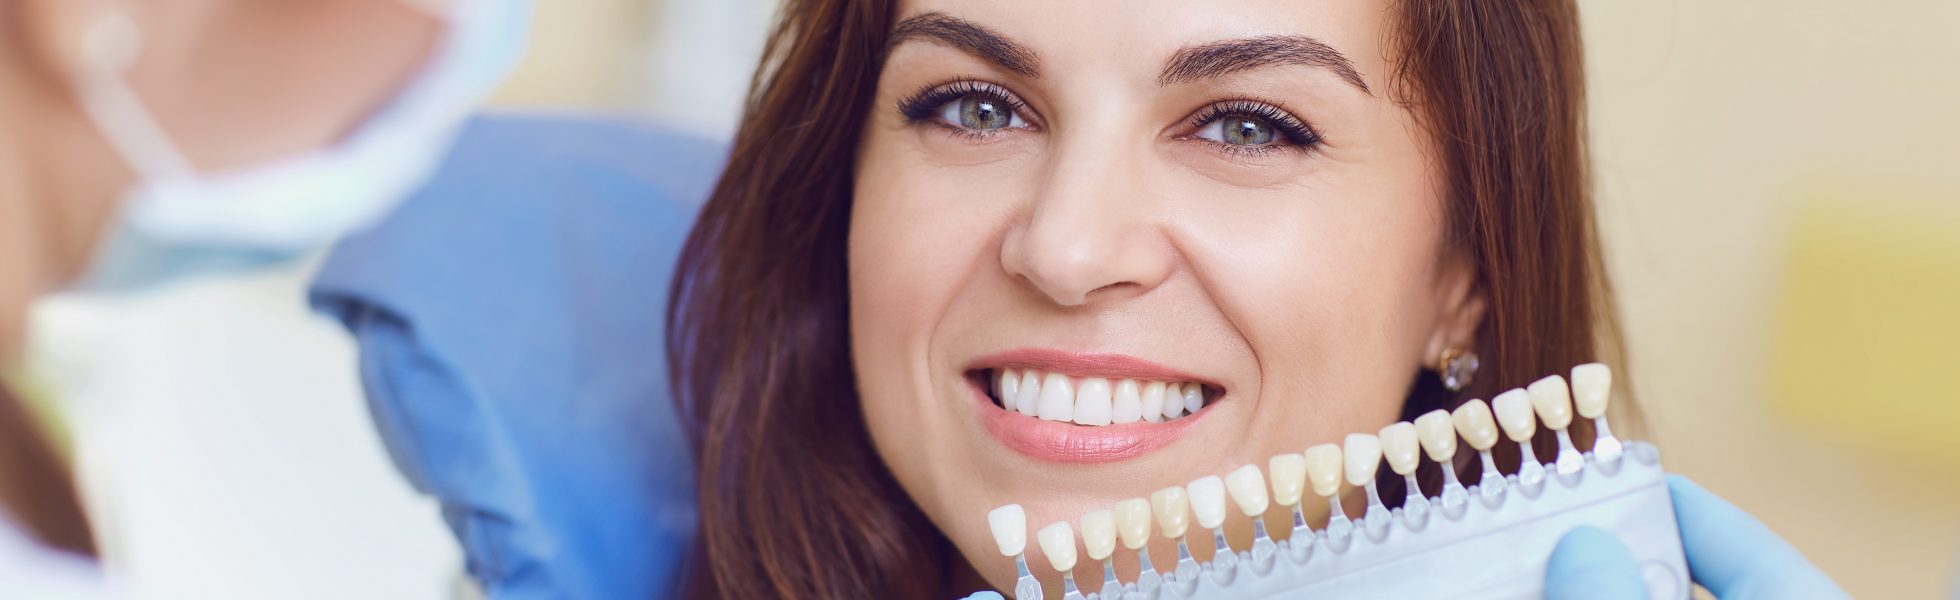 How Much Does it Cost to Get Teeth Professionally Whitened